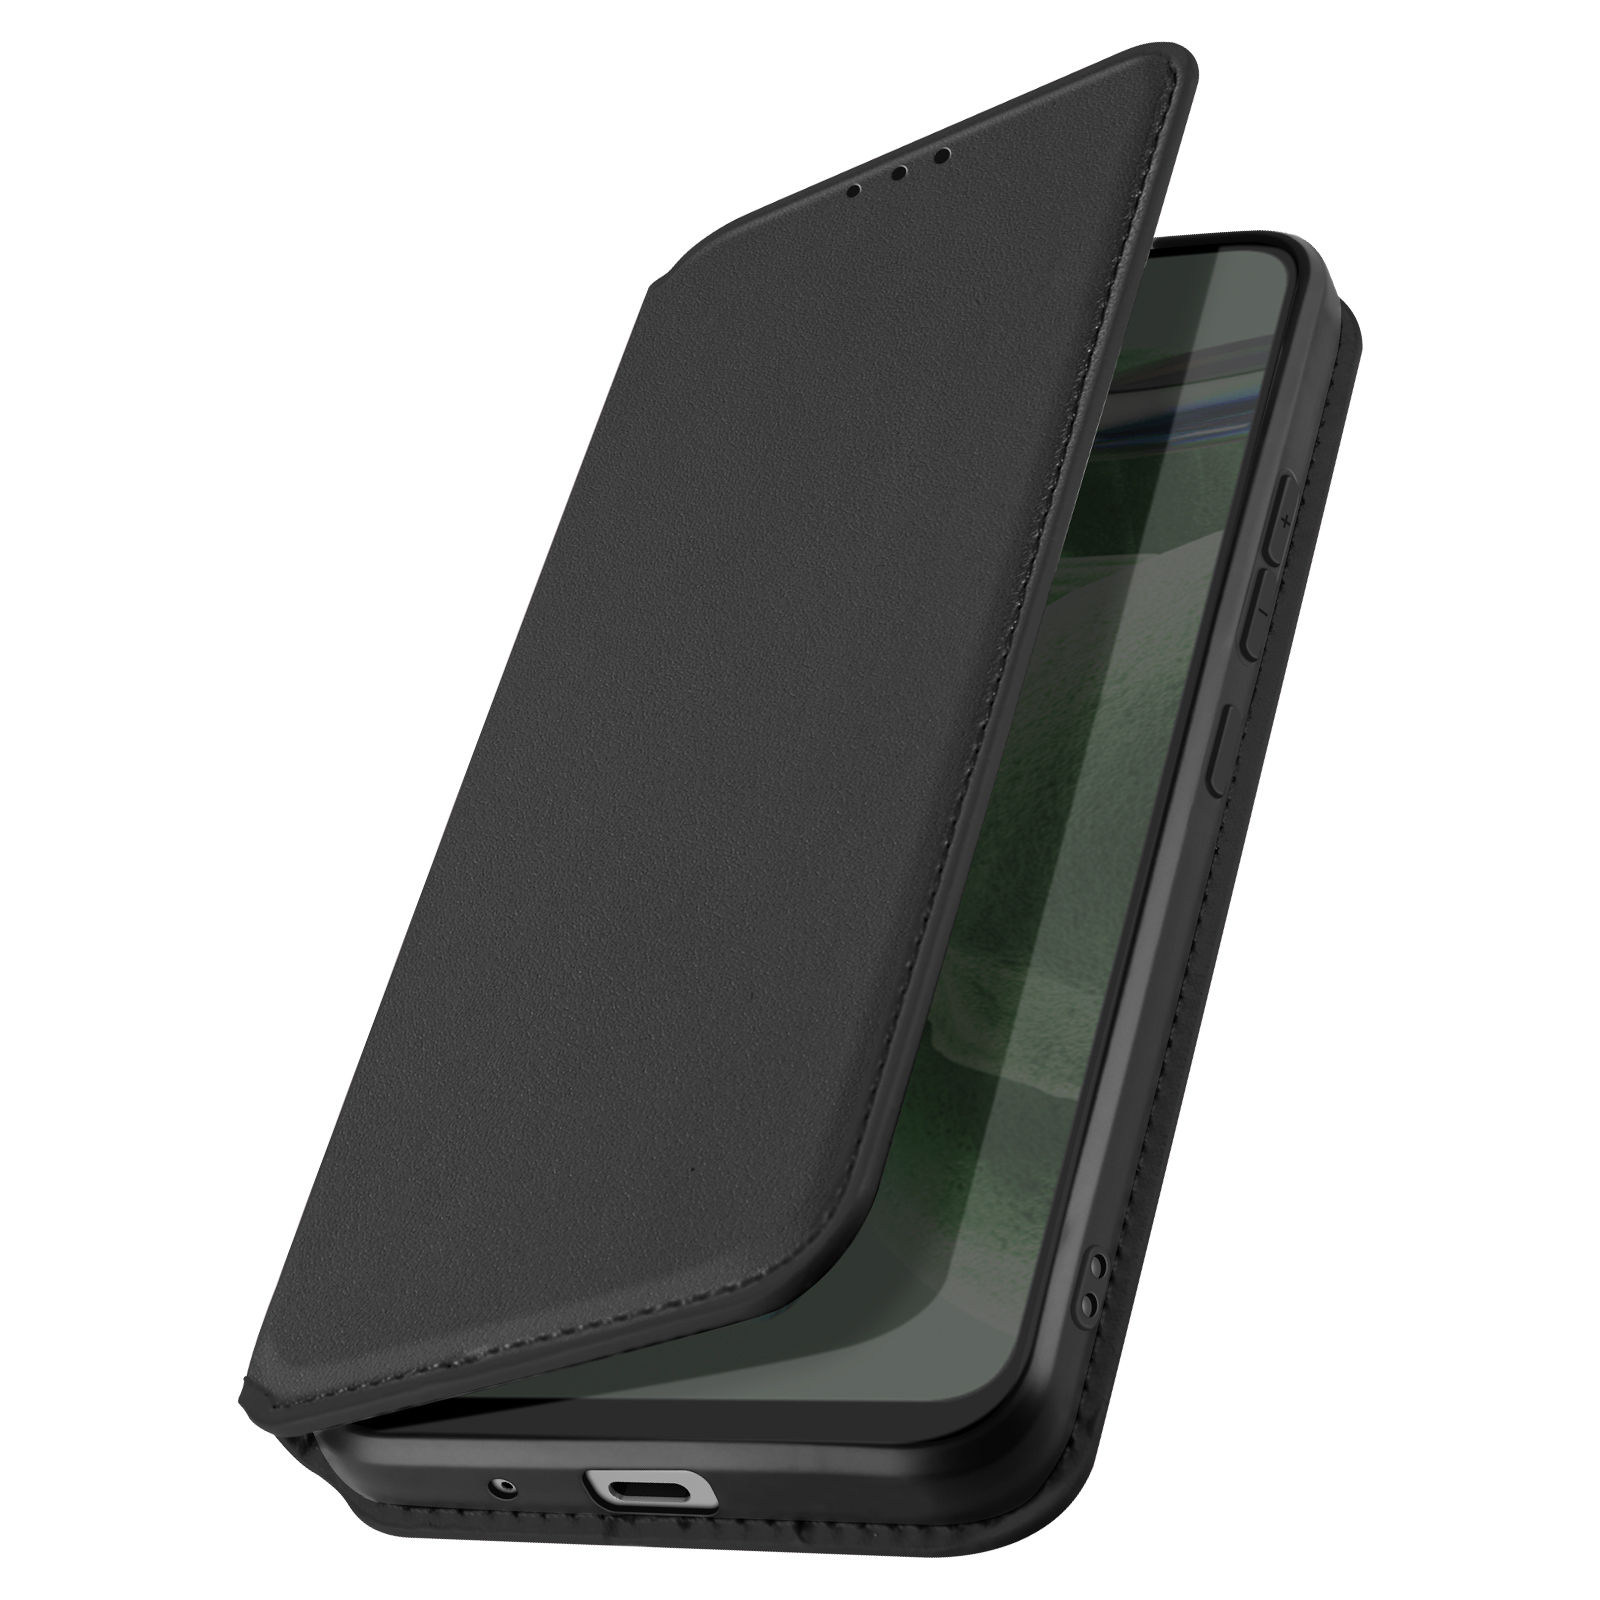 Backcover Y61, Schwarz Series, Classic Bookcover, Wiko, Magnetklappe Wiko mit AVIZAR Edition,